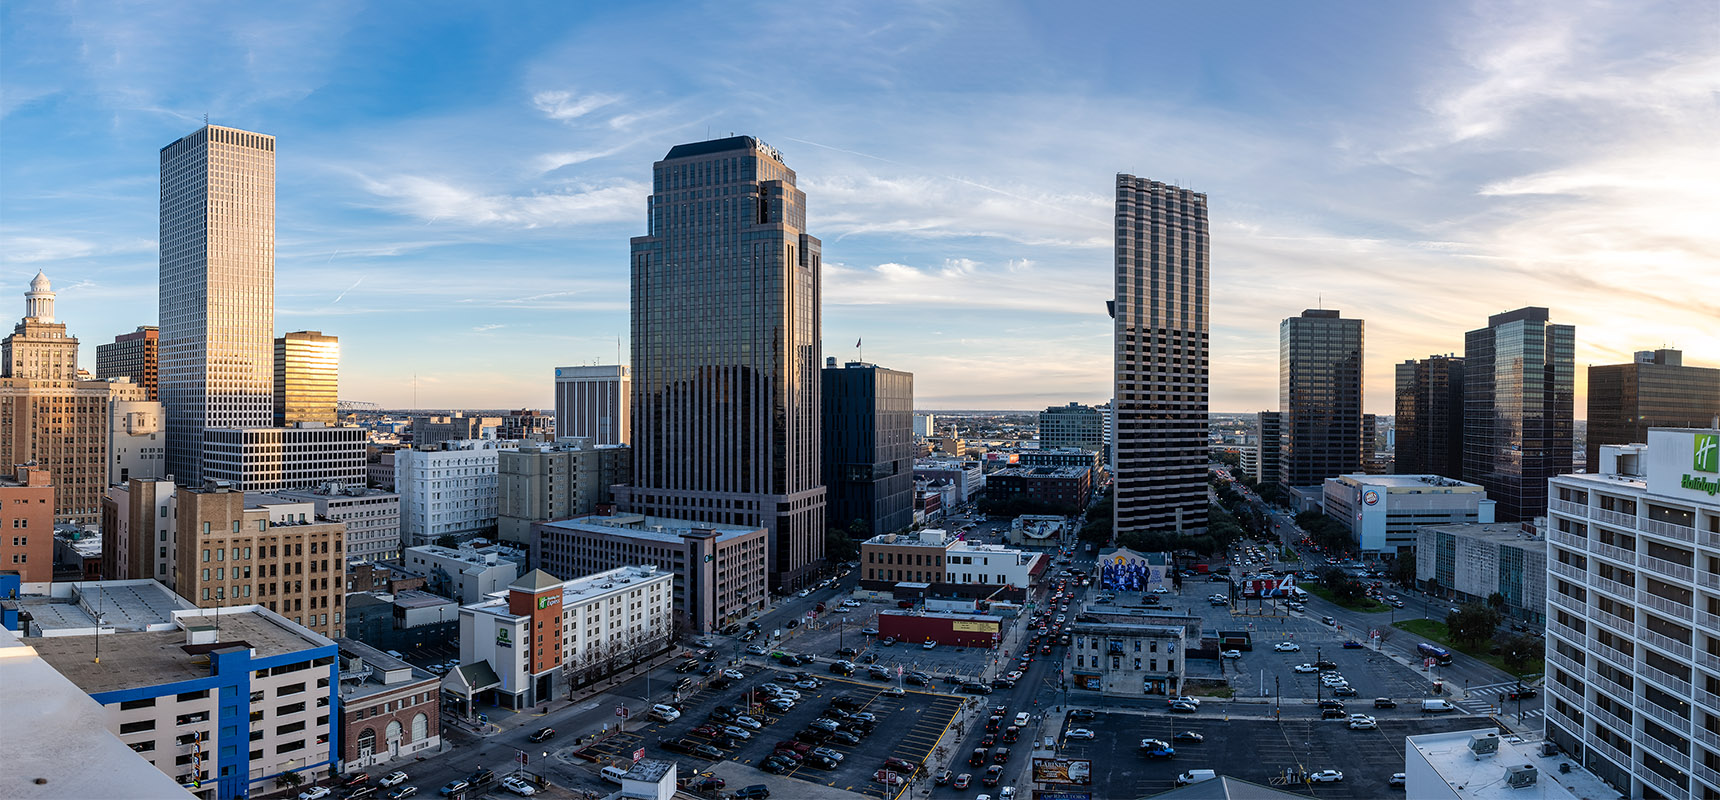 Panorama looking south from the rooftop terrace of our hotel on Gravier Street